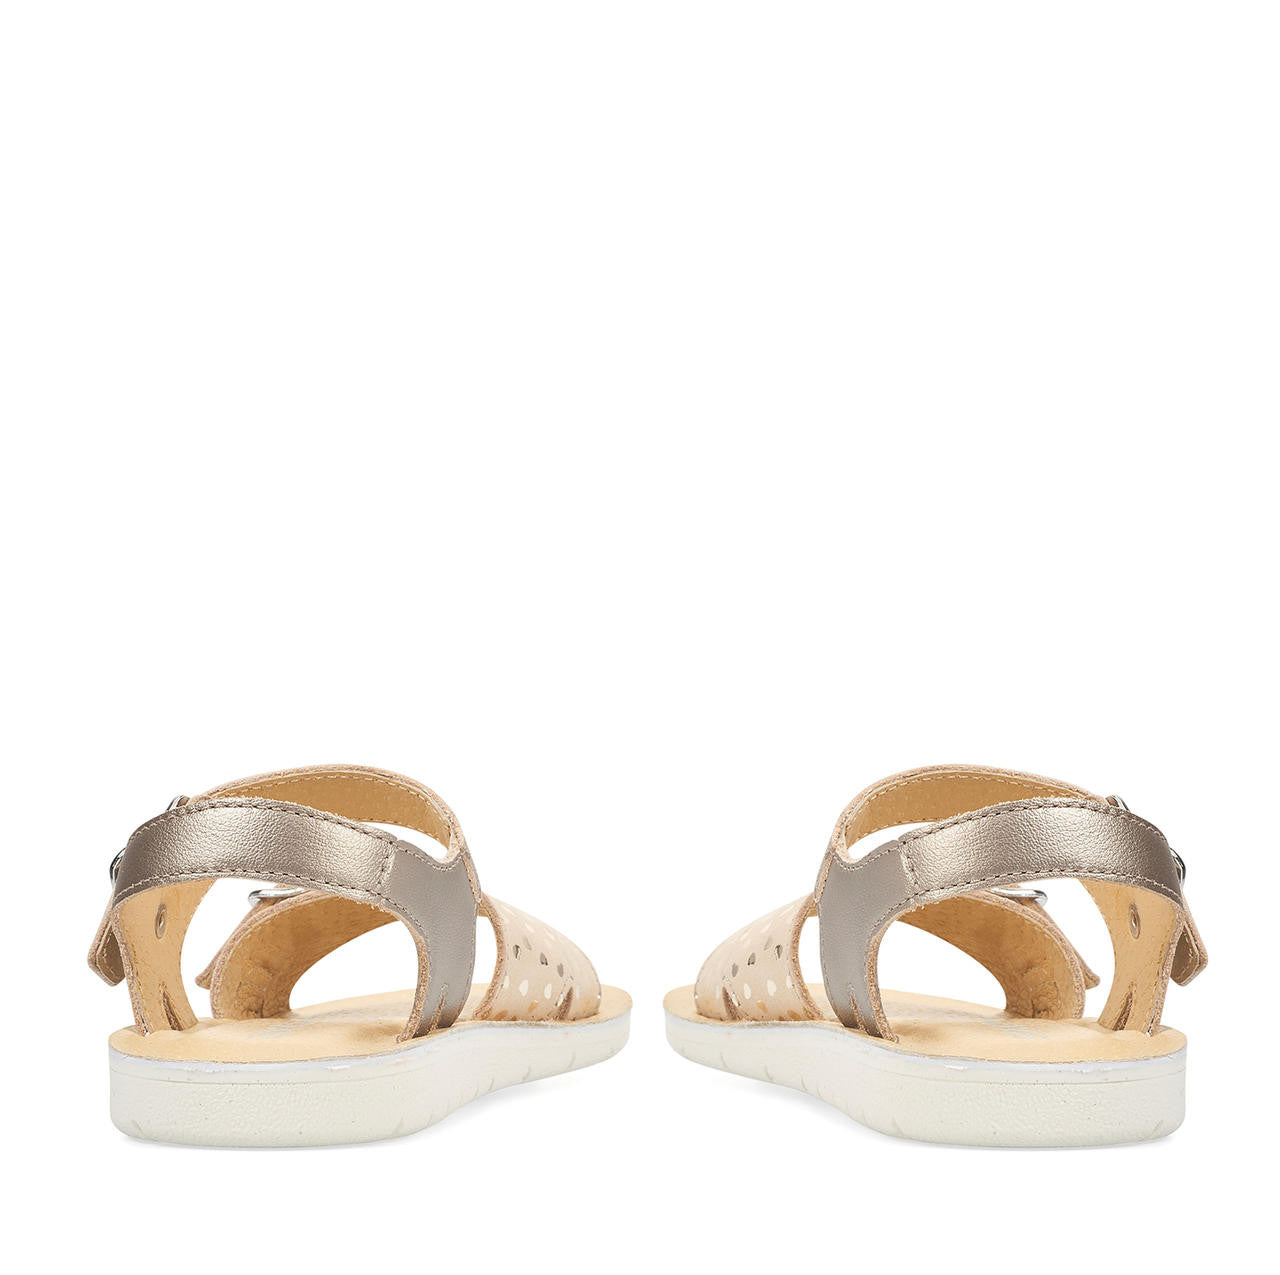 A pair of girls sandals by Start Rite ,style Enchant, in gold leather with buckle fastening. Back view.